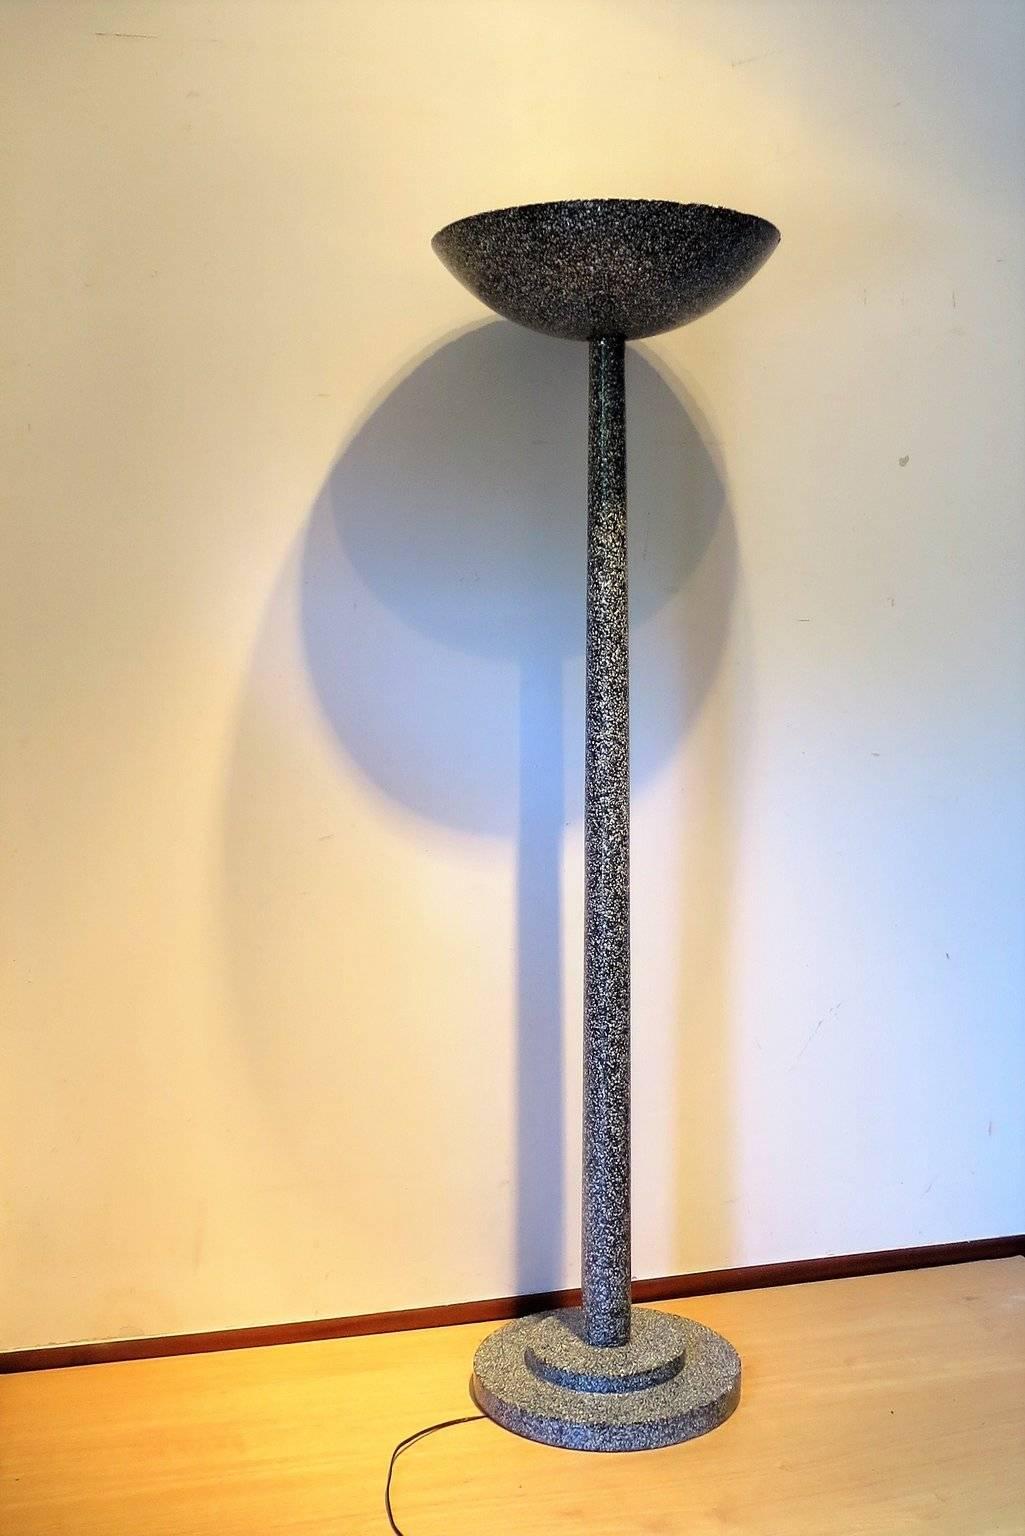 Art Deco floor lamp or torchere standing on a double circle base , the top is a curved circle .
The material is a conglomerat with inclusion of mother-of-pearl,
the inside top is in glass mosaic .
Very interesting and unic architectural design ,